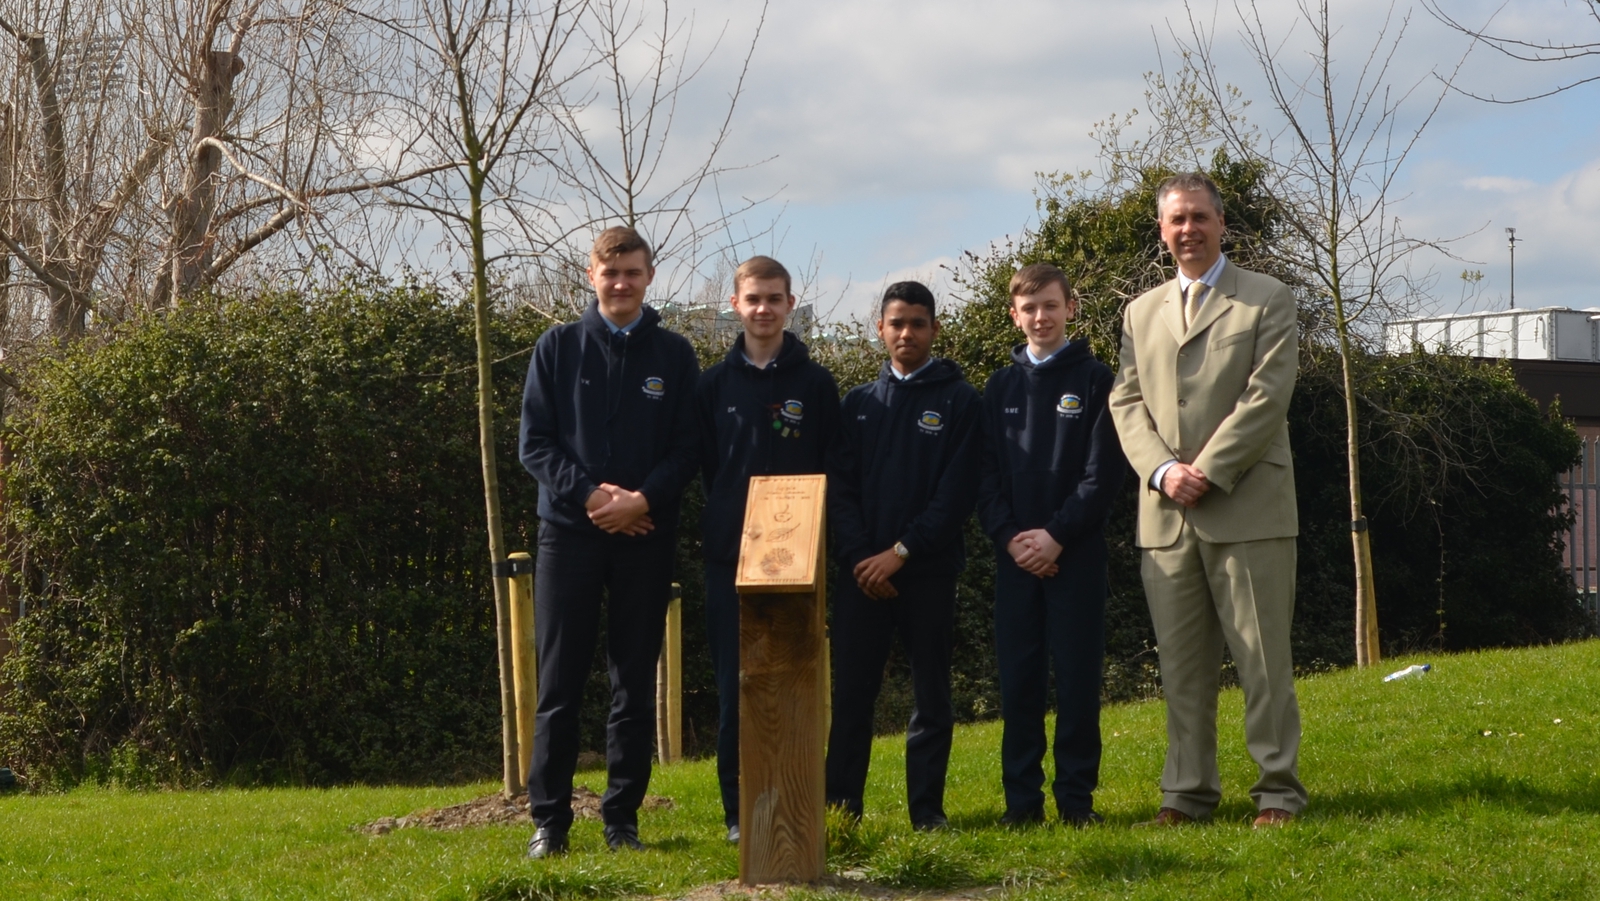 Image - Paul Crone and students from Old Bawn Community School